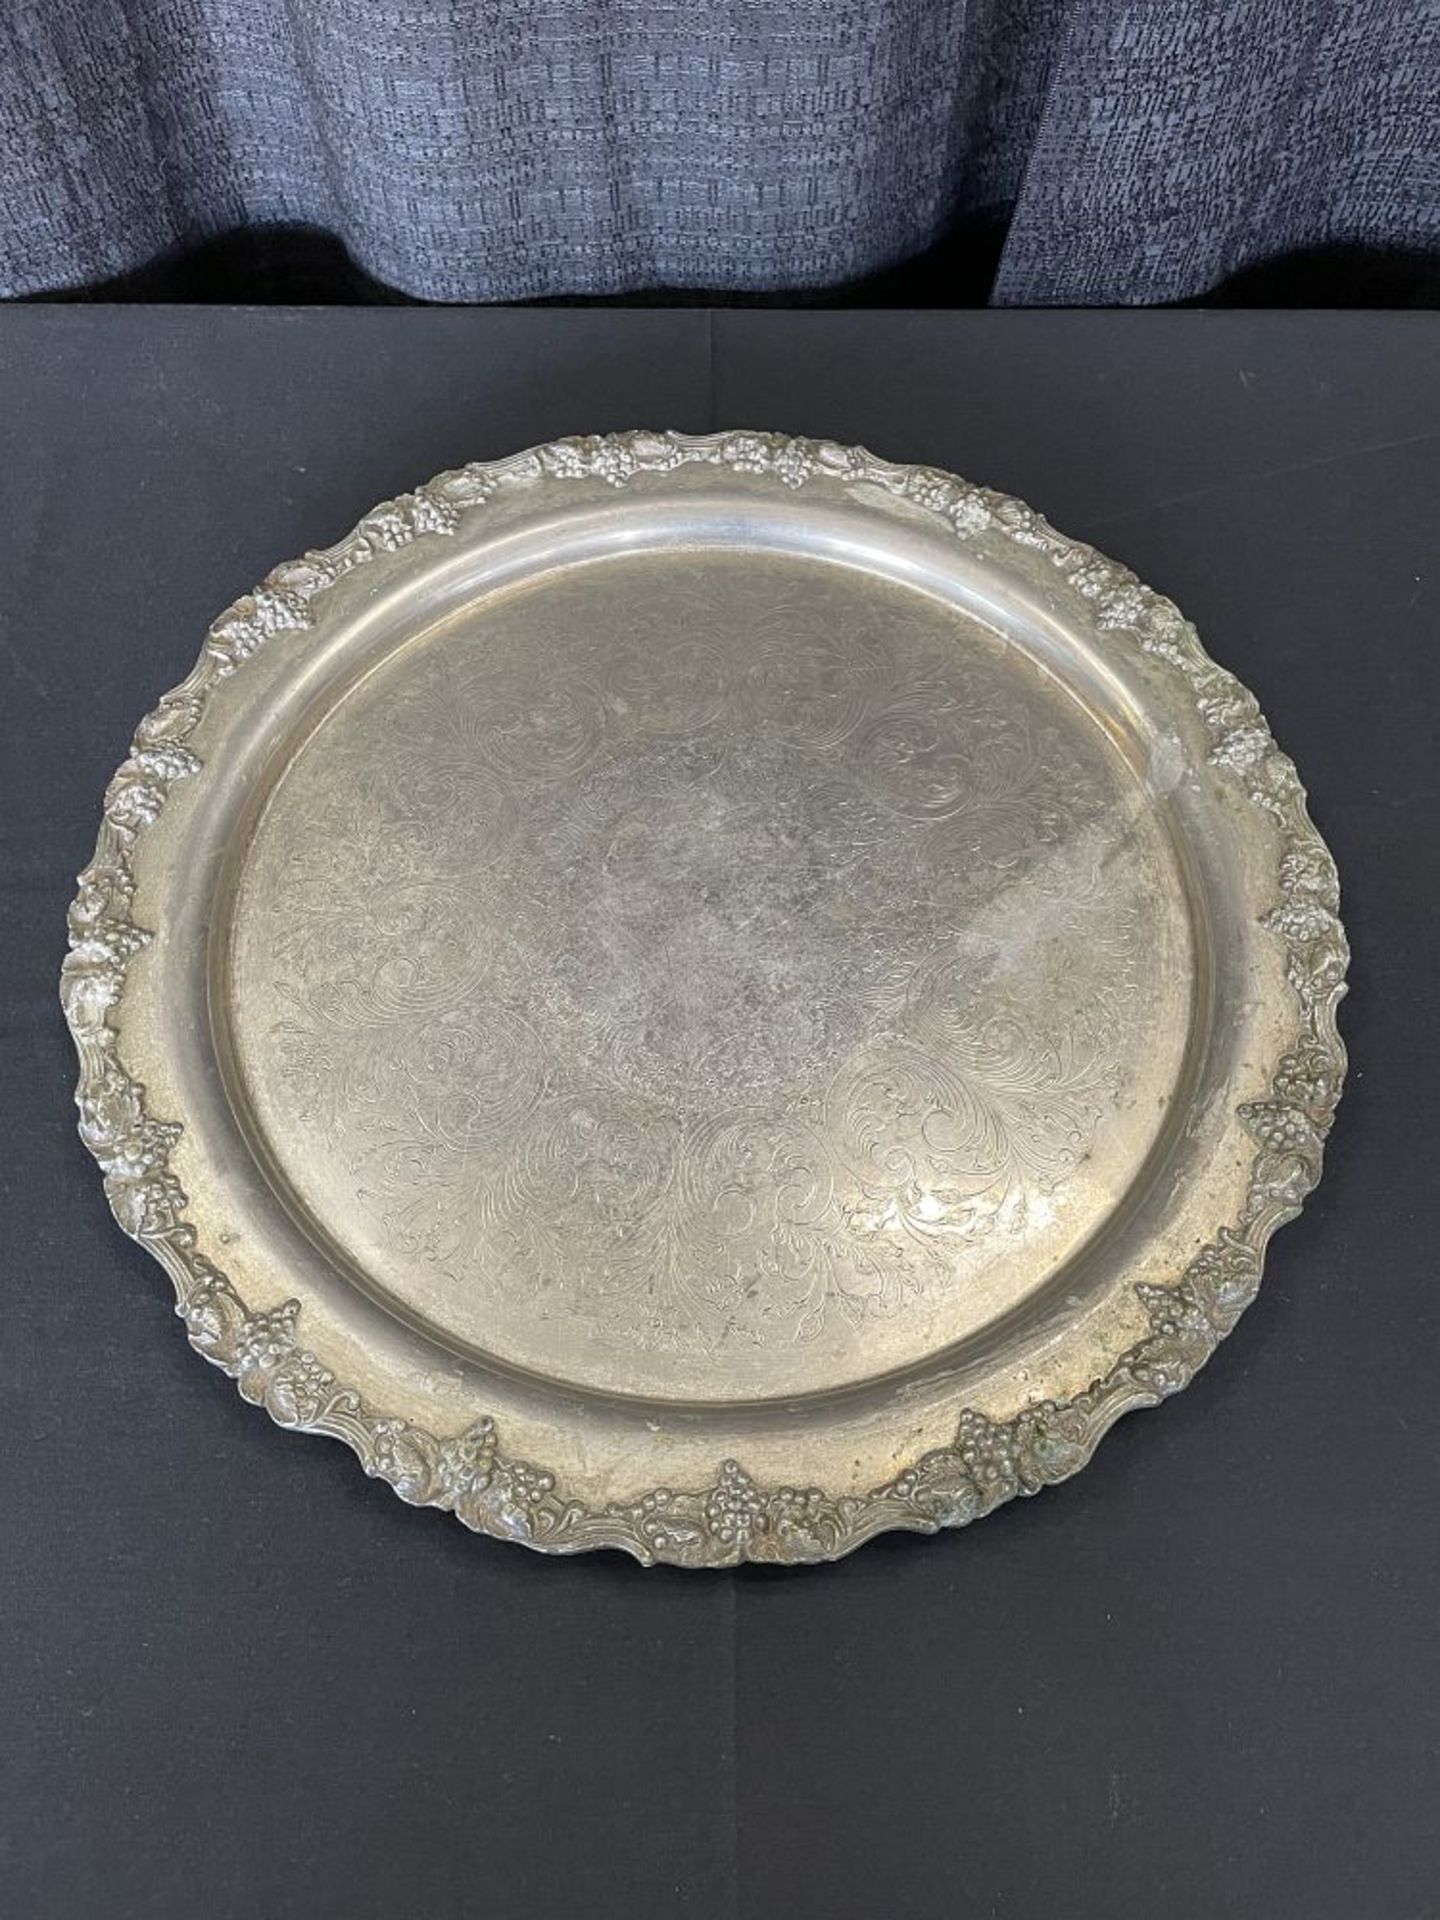 19.25" Round Silver Plate Serving Tray w/ Ornate Edge